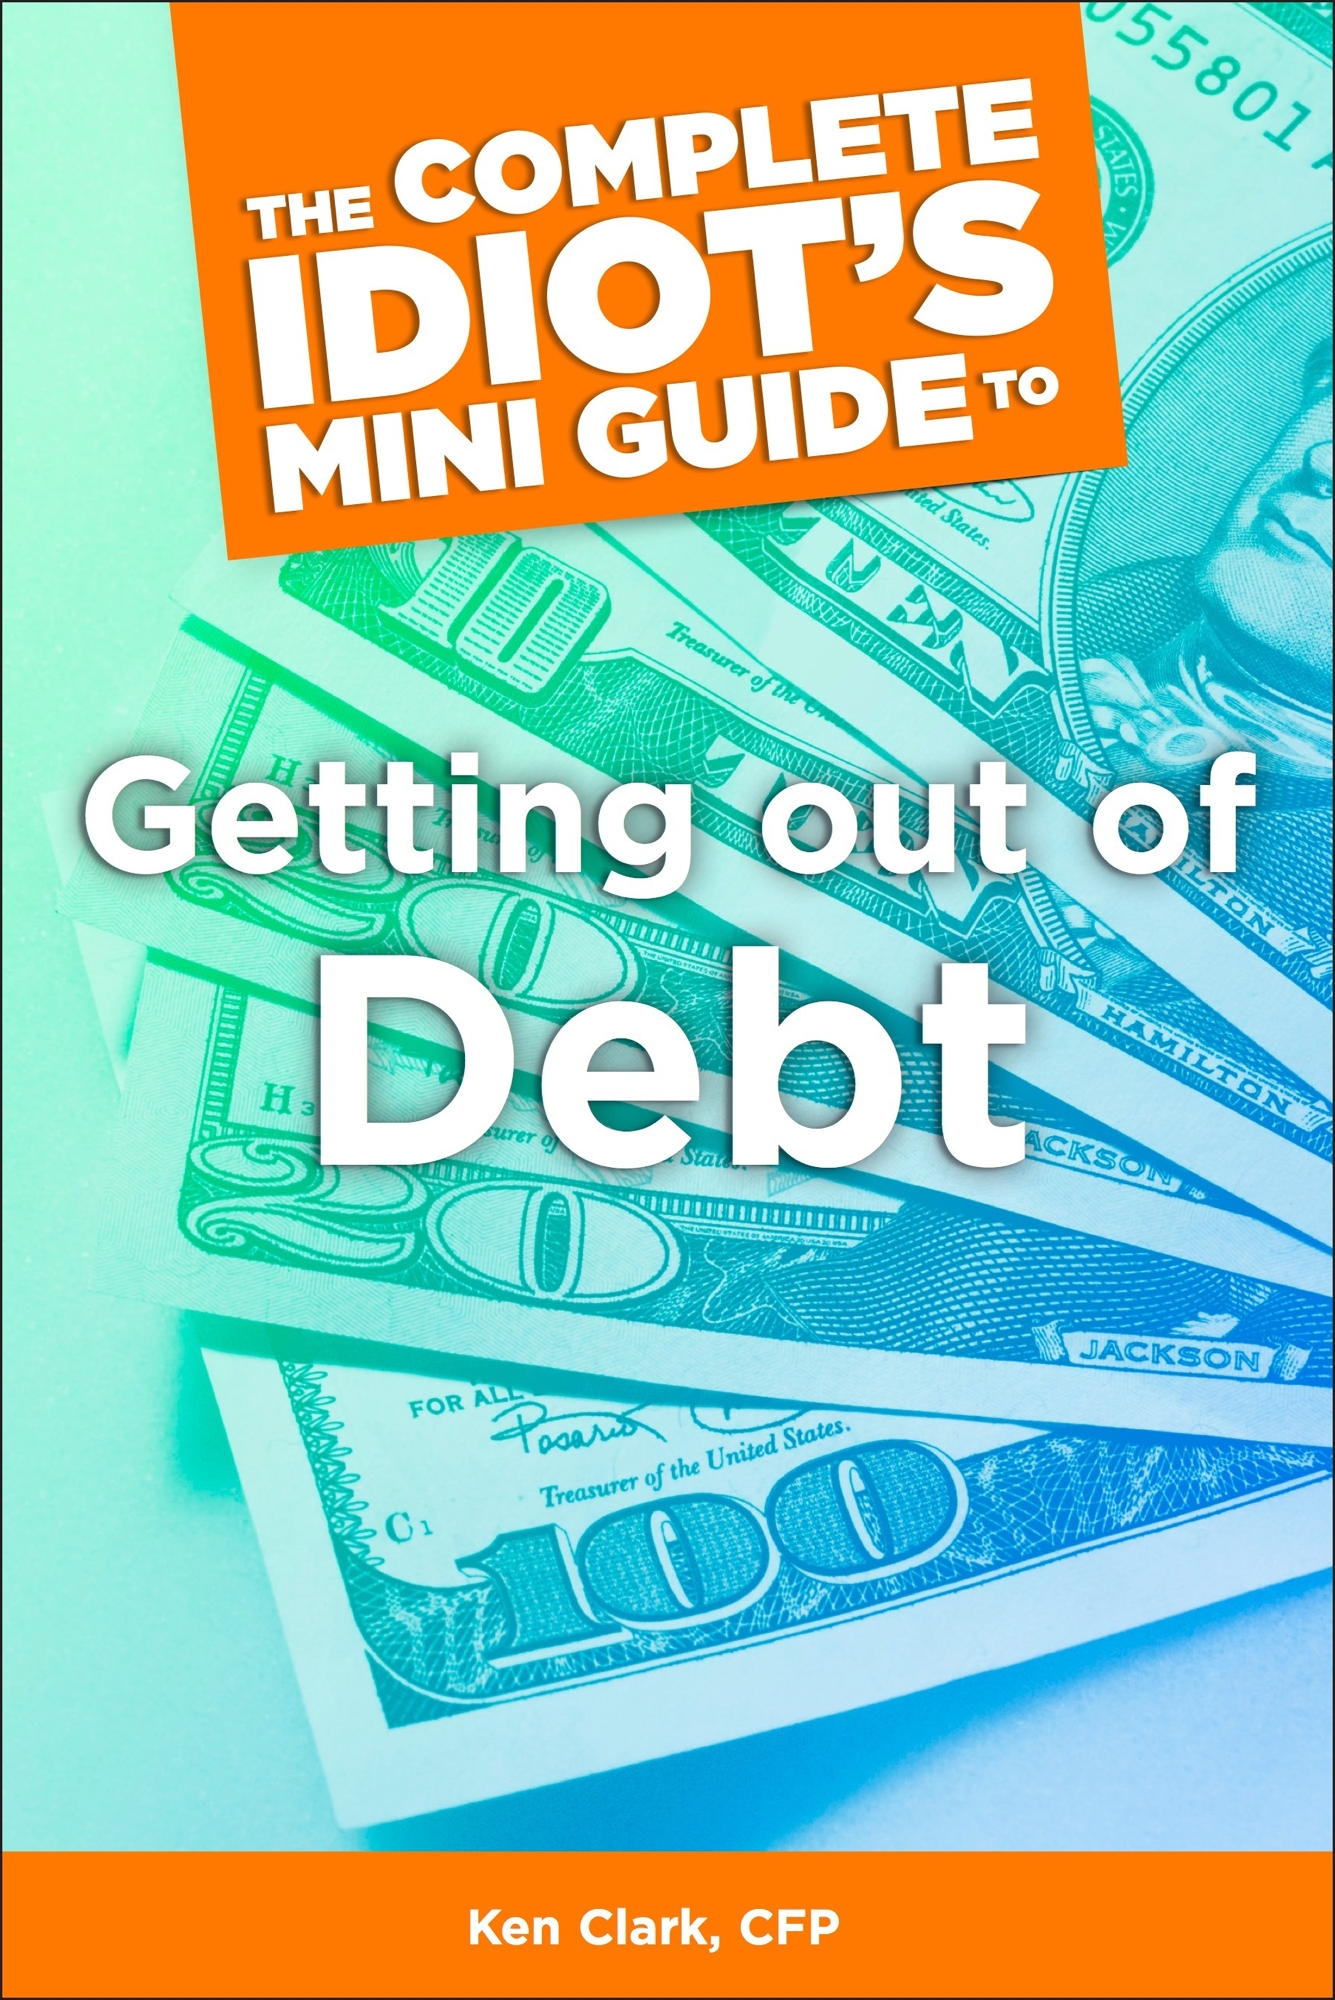 The Complete Idiot's Concise Guide to Getting Out of Debt